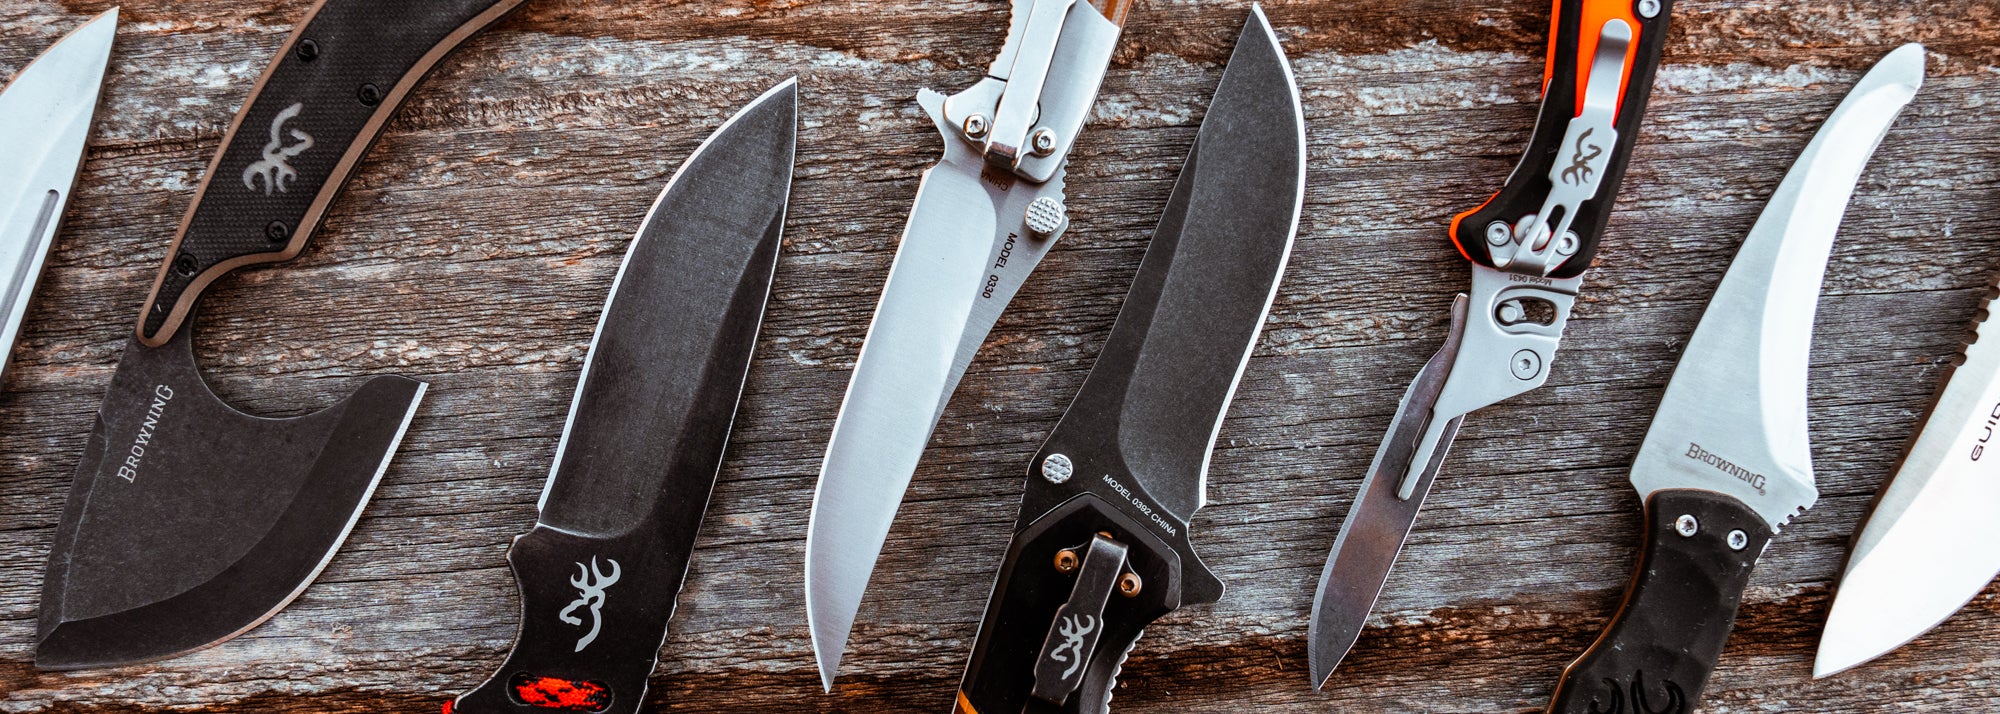 Knives with Covers